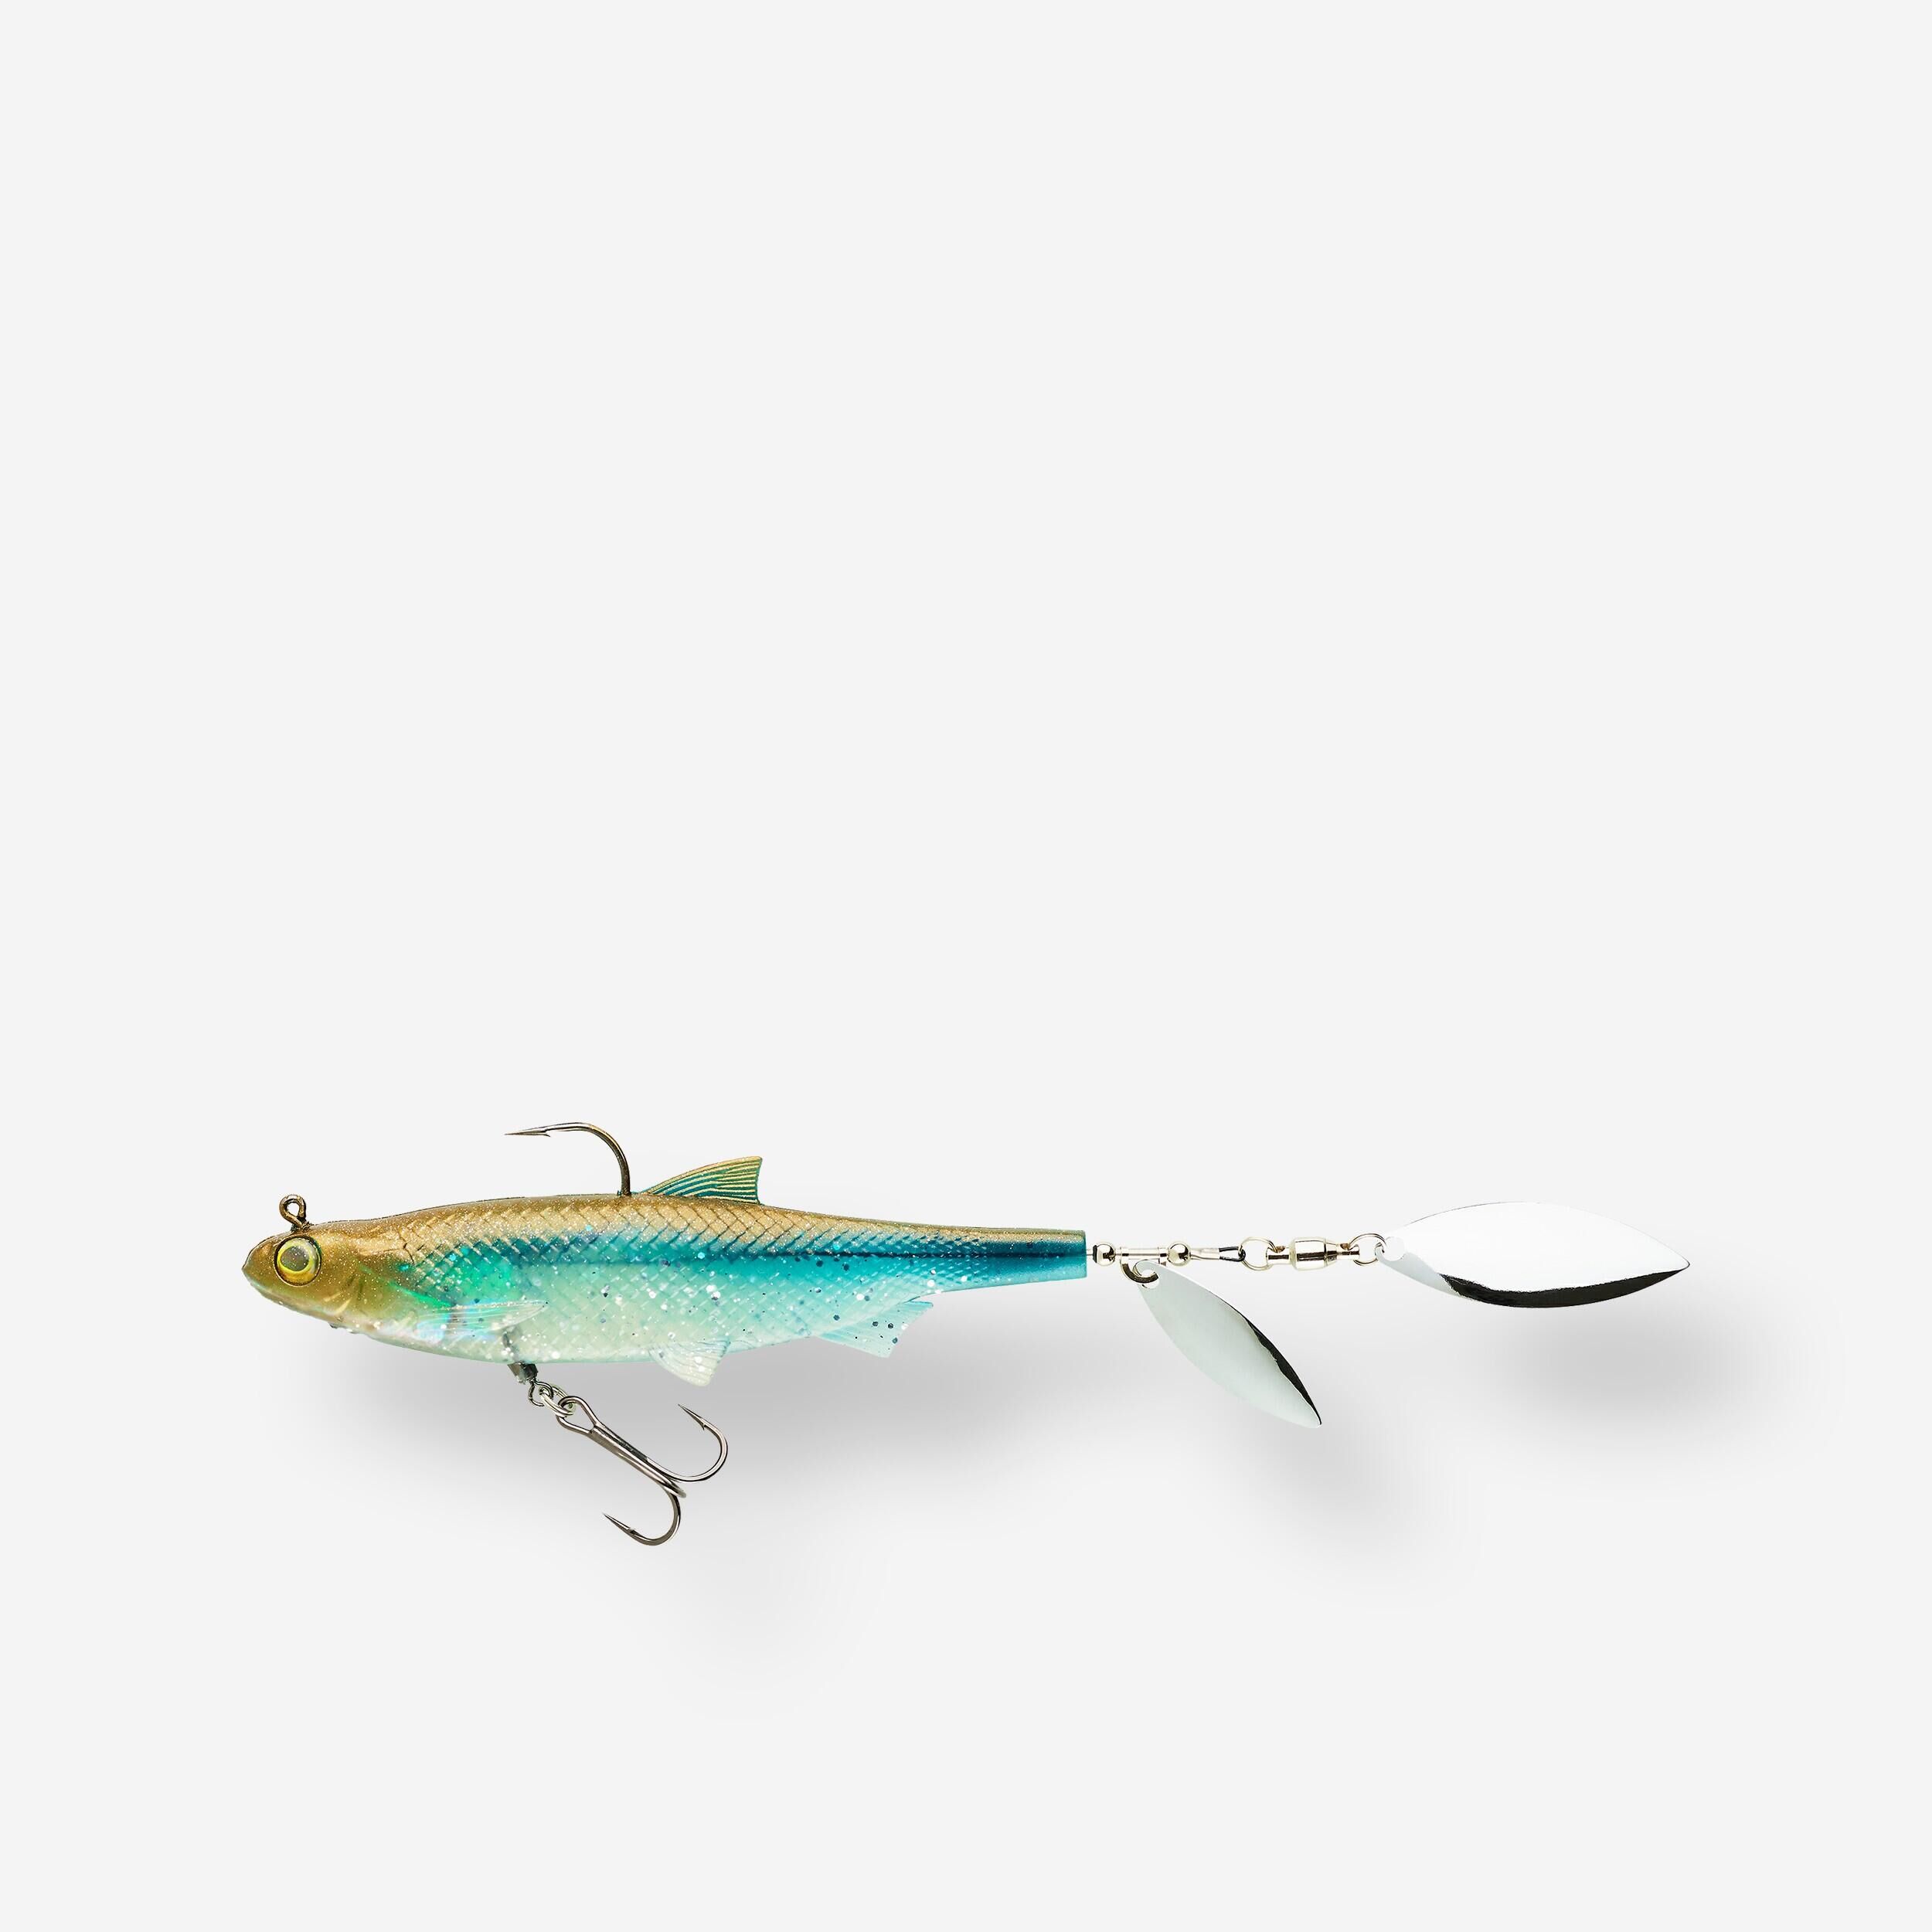 CAPERLAN ROACHSPIN 120 ROACH SPINTAIL SHAD SOFT LURE BLUE BACK LURE FISHING